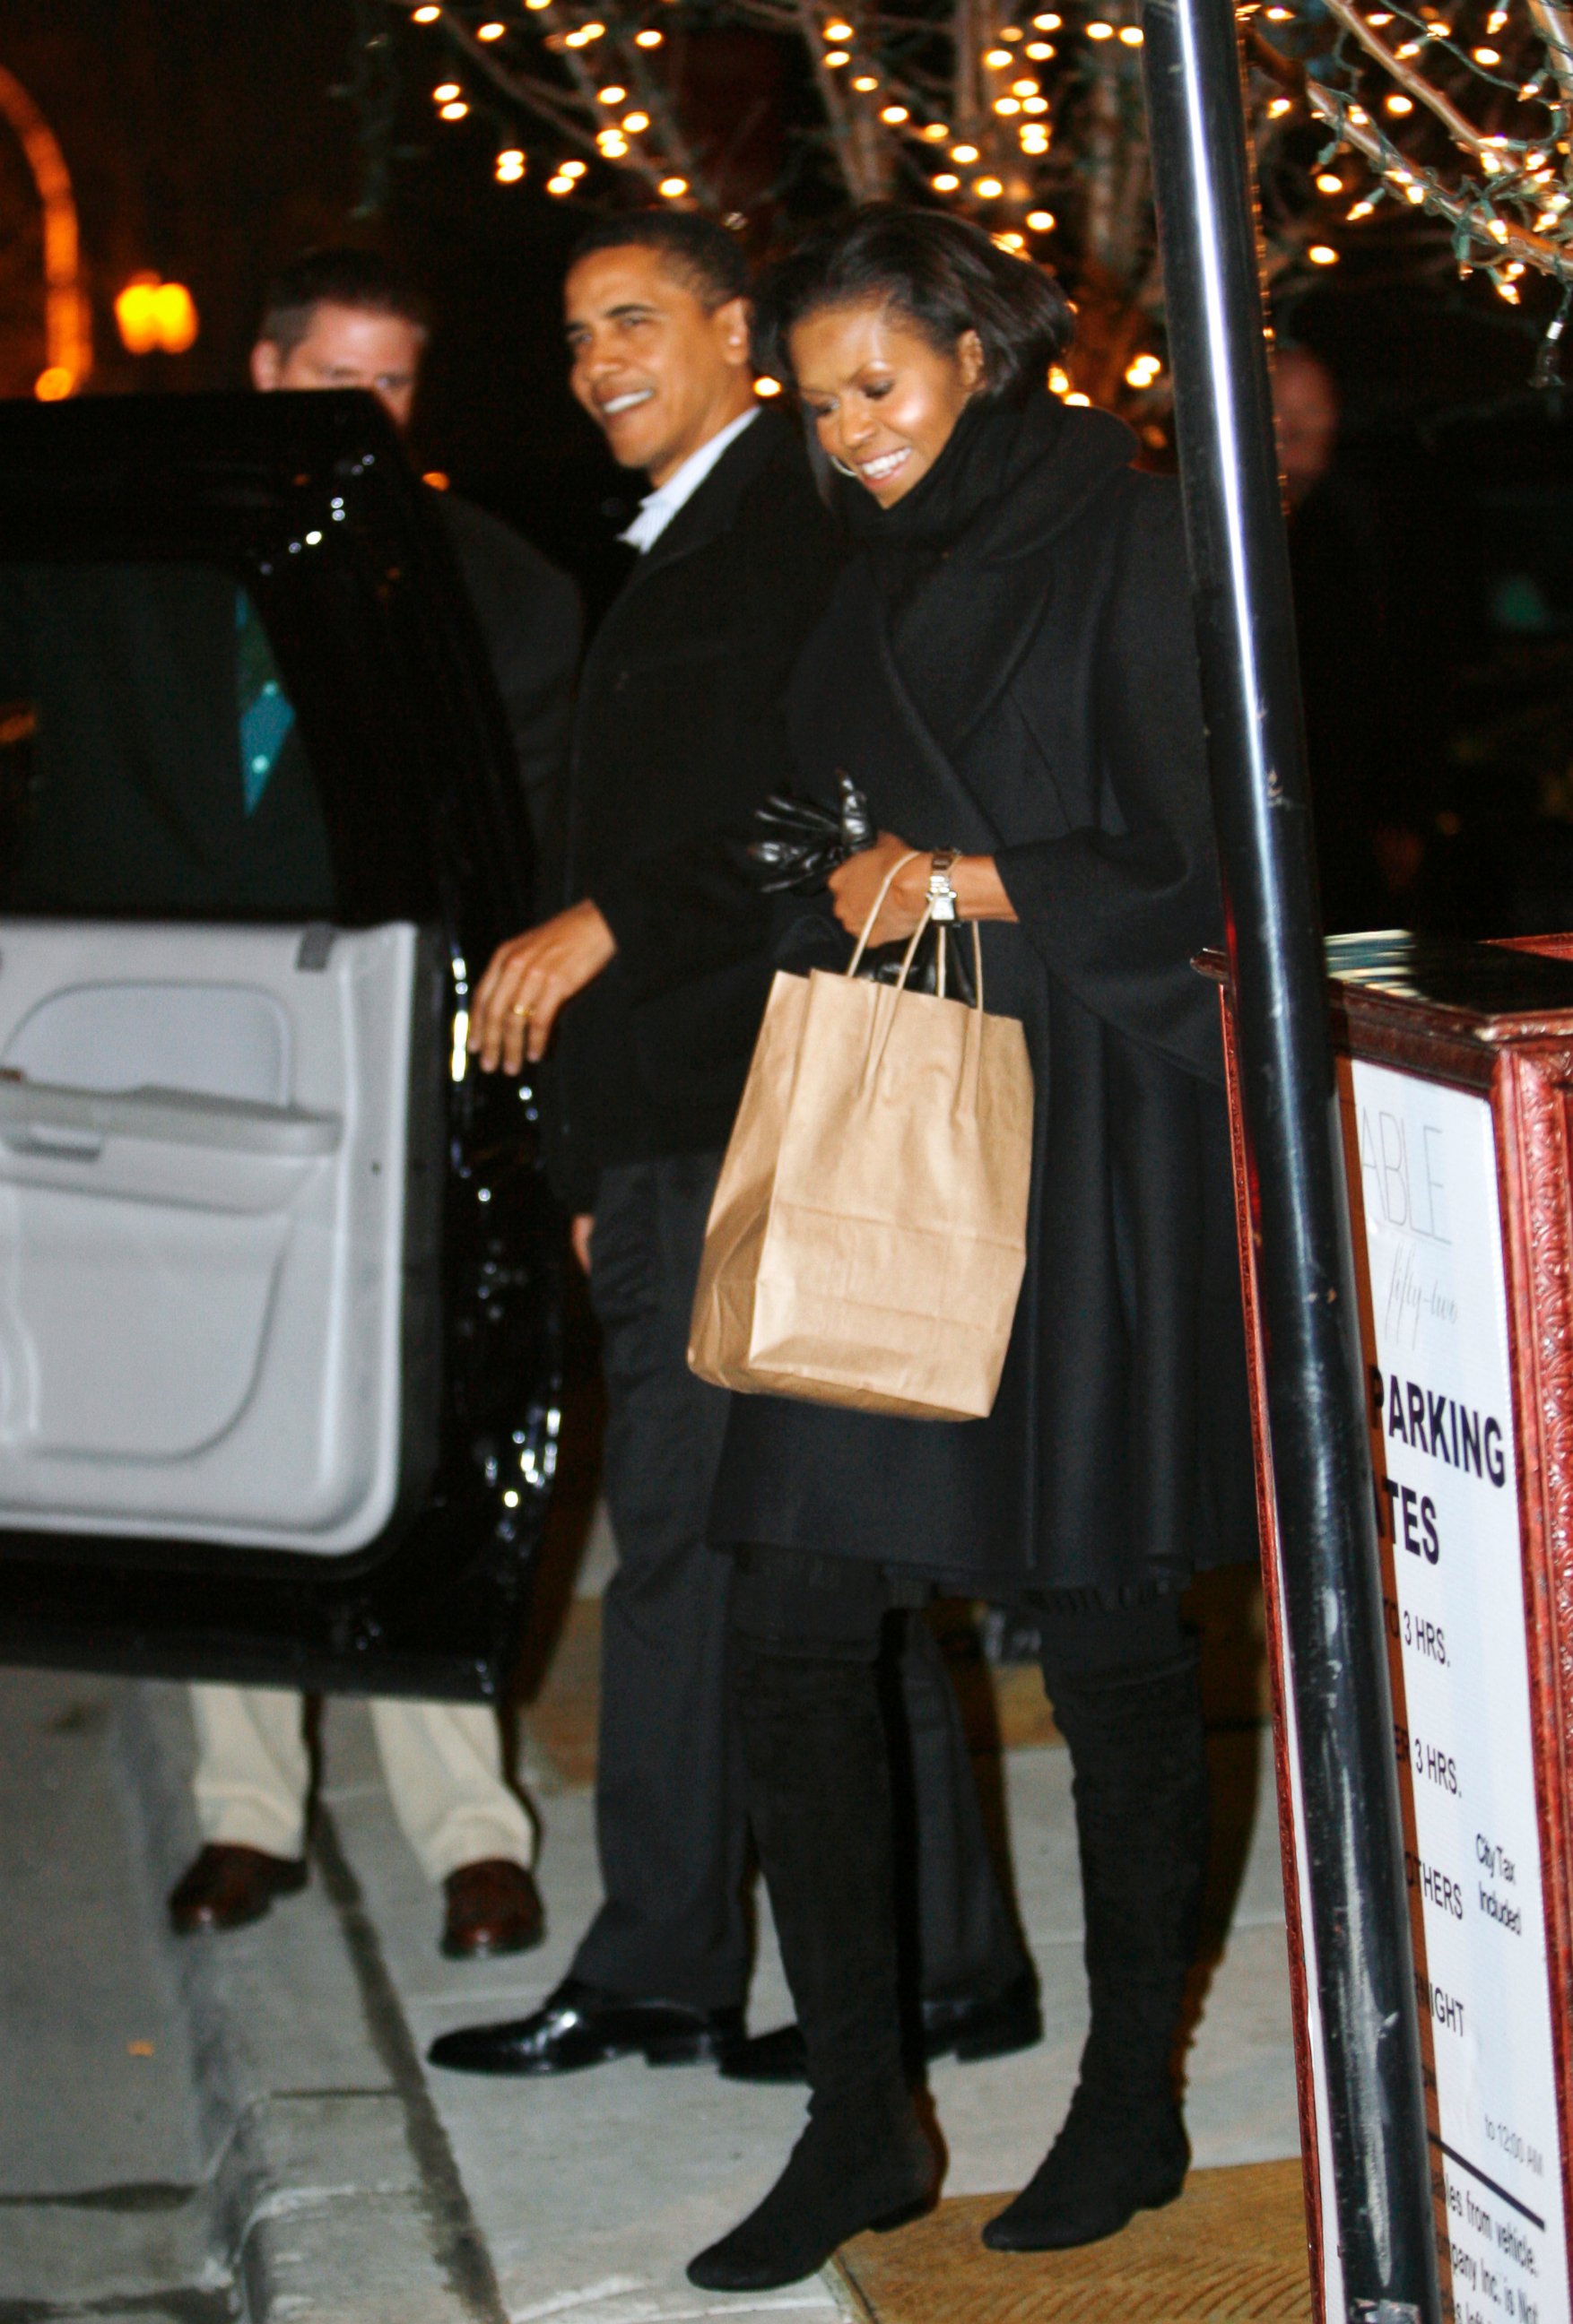 PHOTO: President Barack Obama and first lady Michelle Obama depart Table 52 restaurant after enjoying a Valentine's Day dinner together in Chicago, Ill. on Feb. 14, 2009.